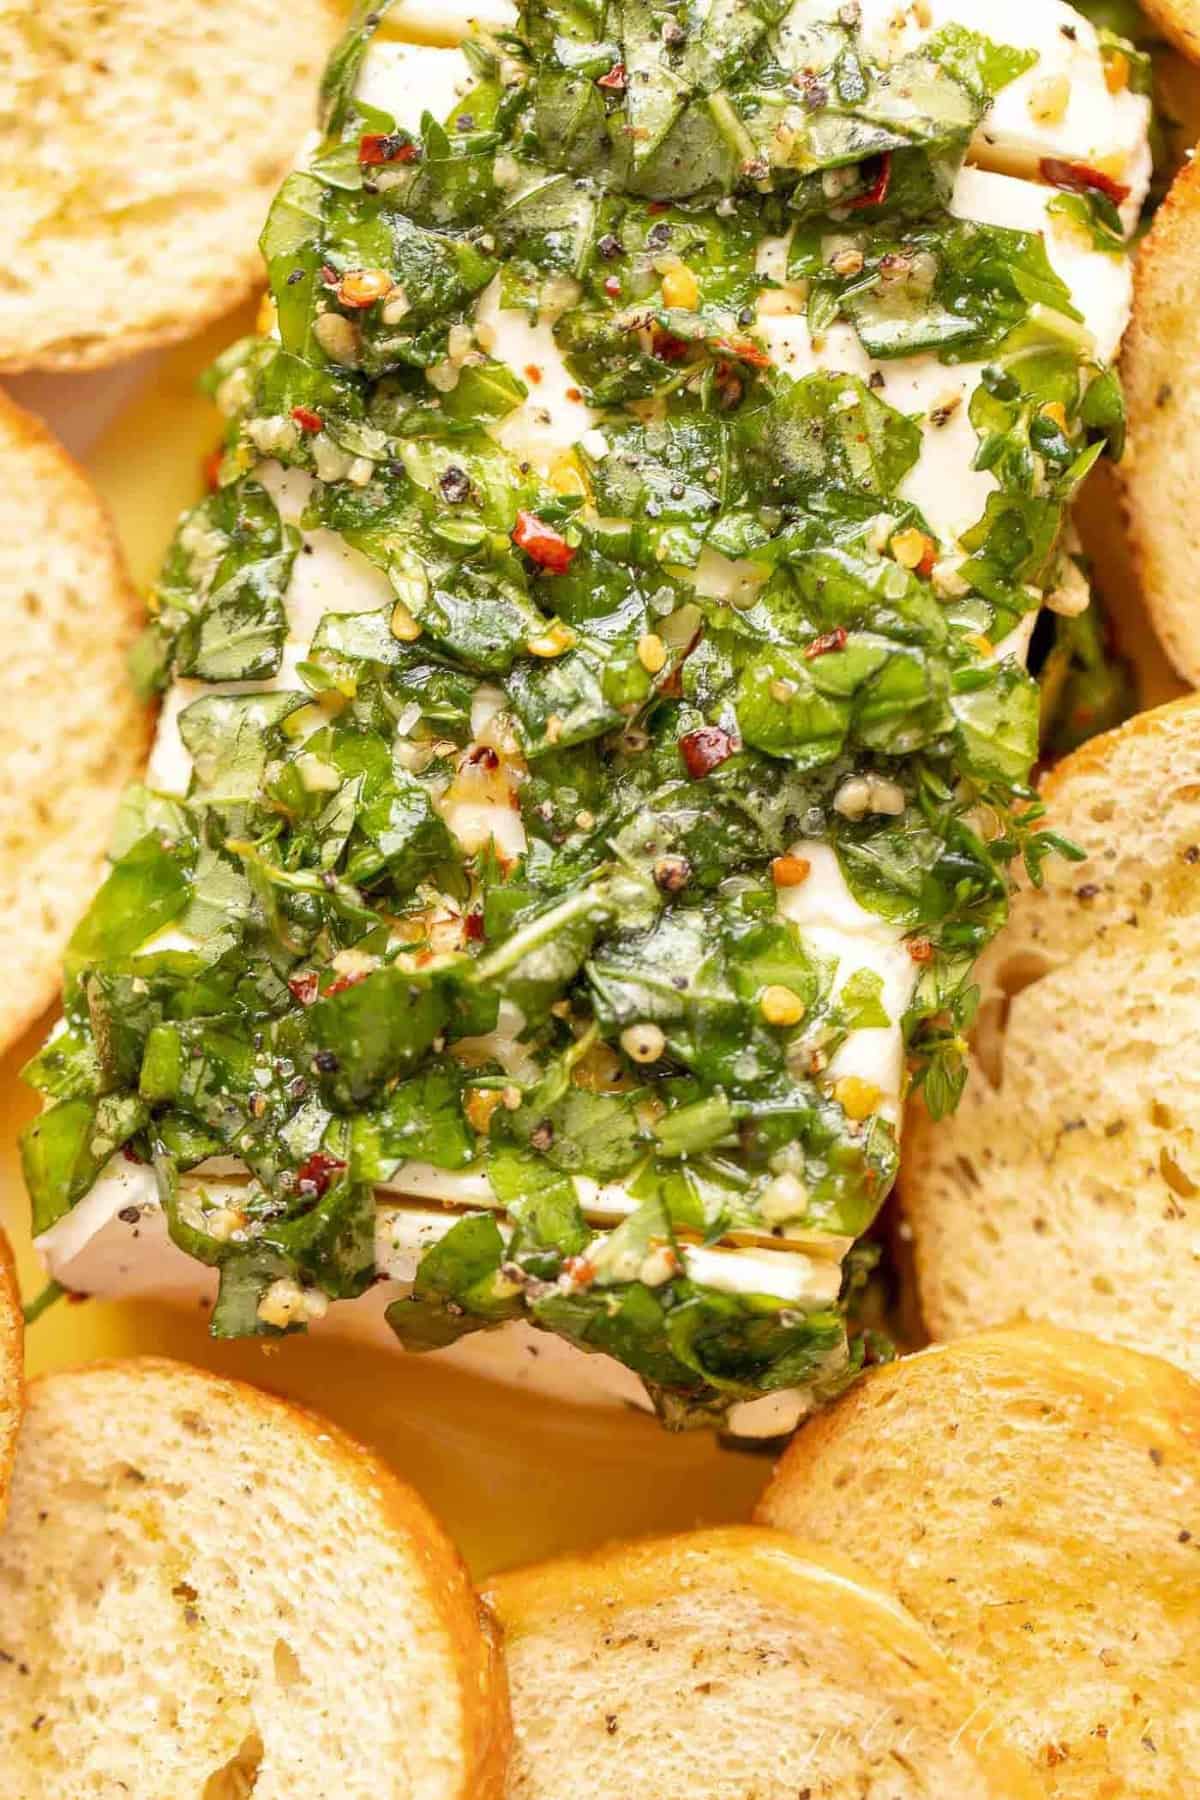 A cream cheese appetizer with marinated cream cheese recipe in herbs and oil, crostini to the side.